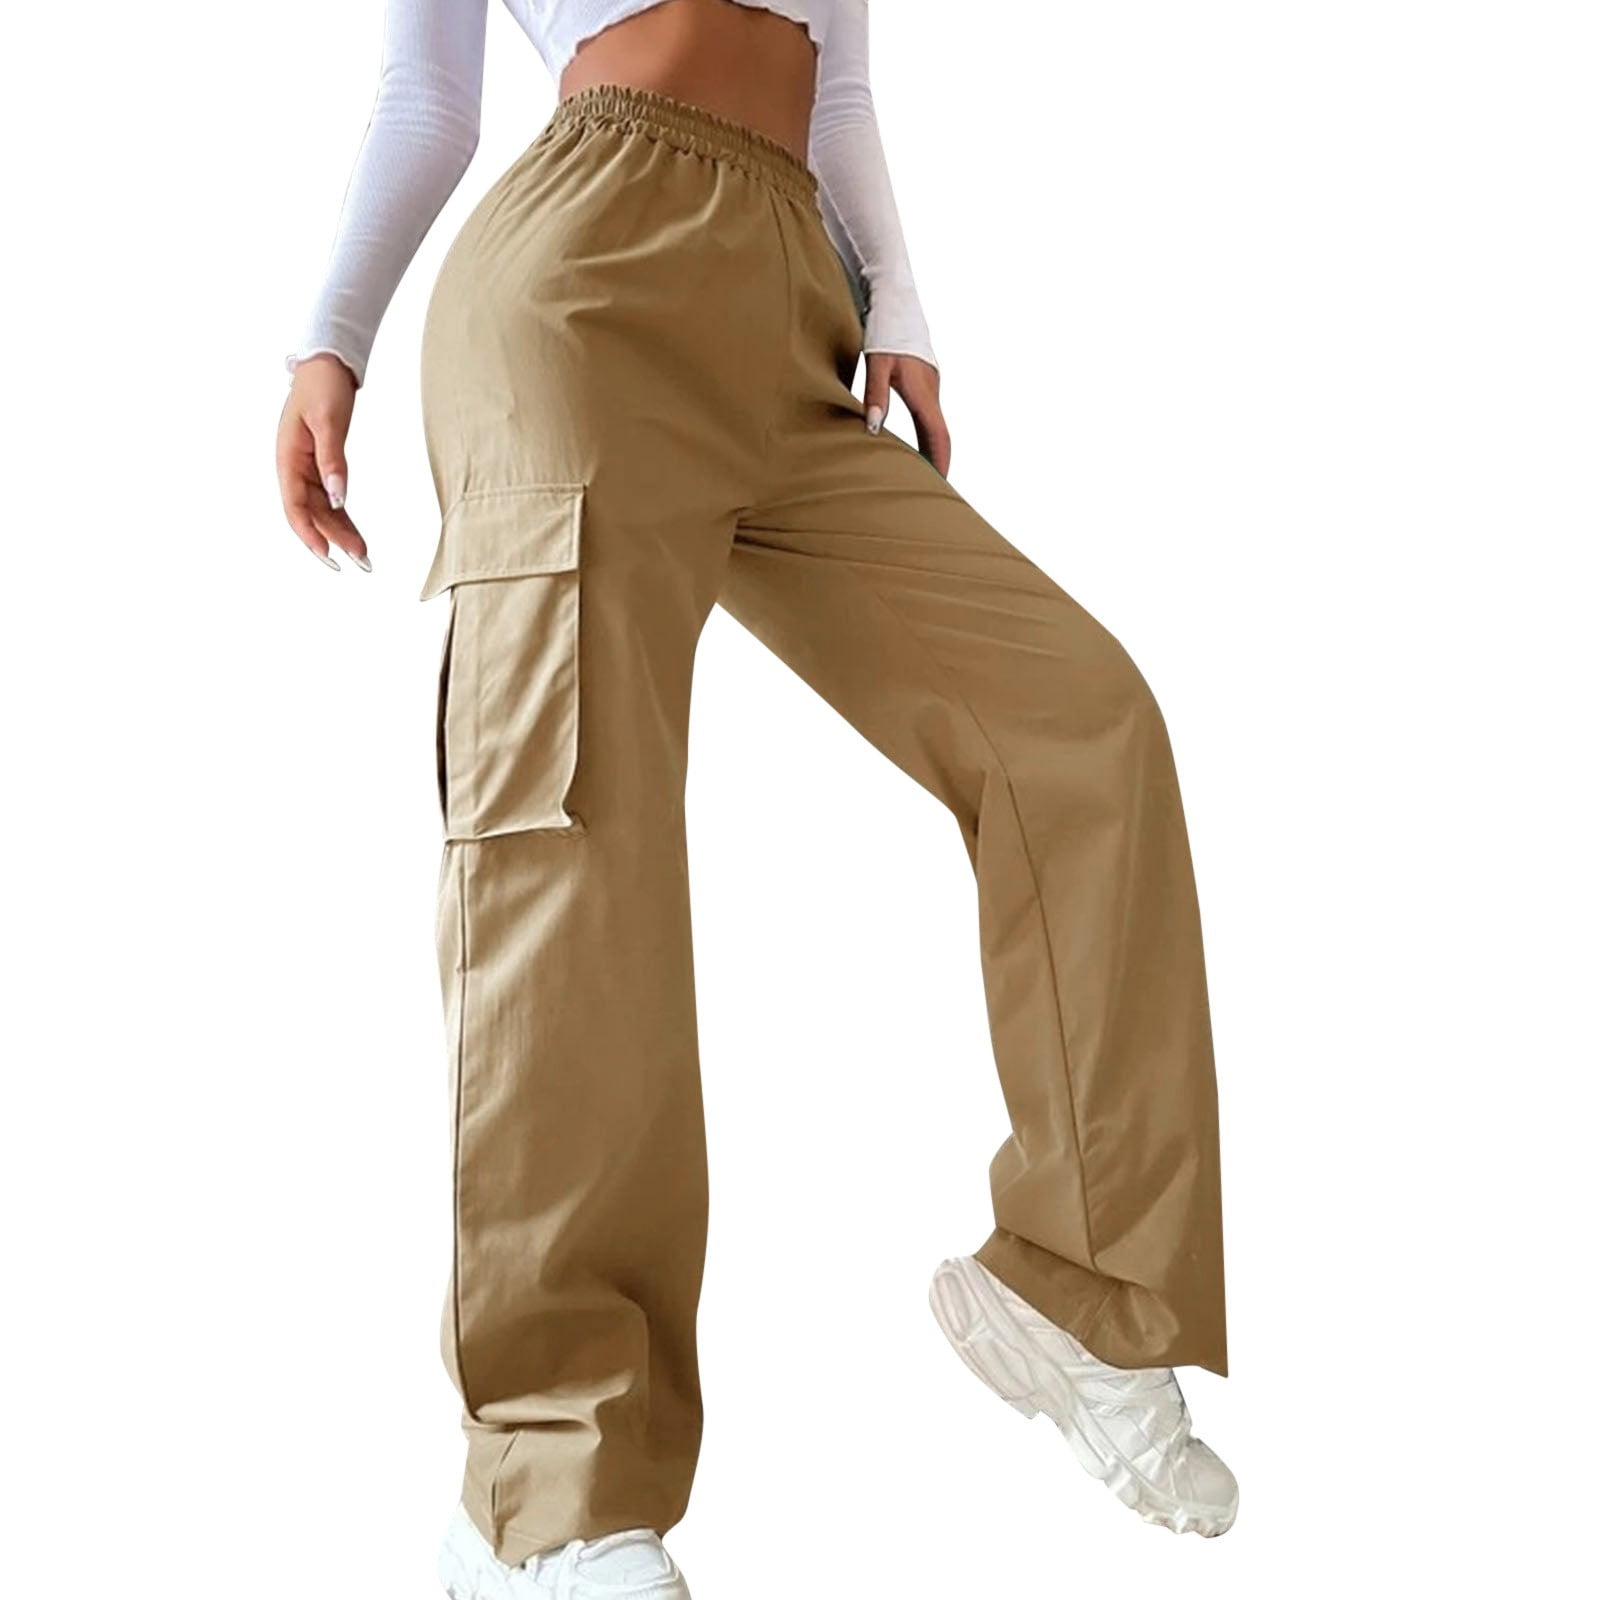 NECHOLOGY Capris For WomenWomen High Waist Straight Wide Leg Hollow Out  Bandage Cut Out Trousers Grey Small 